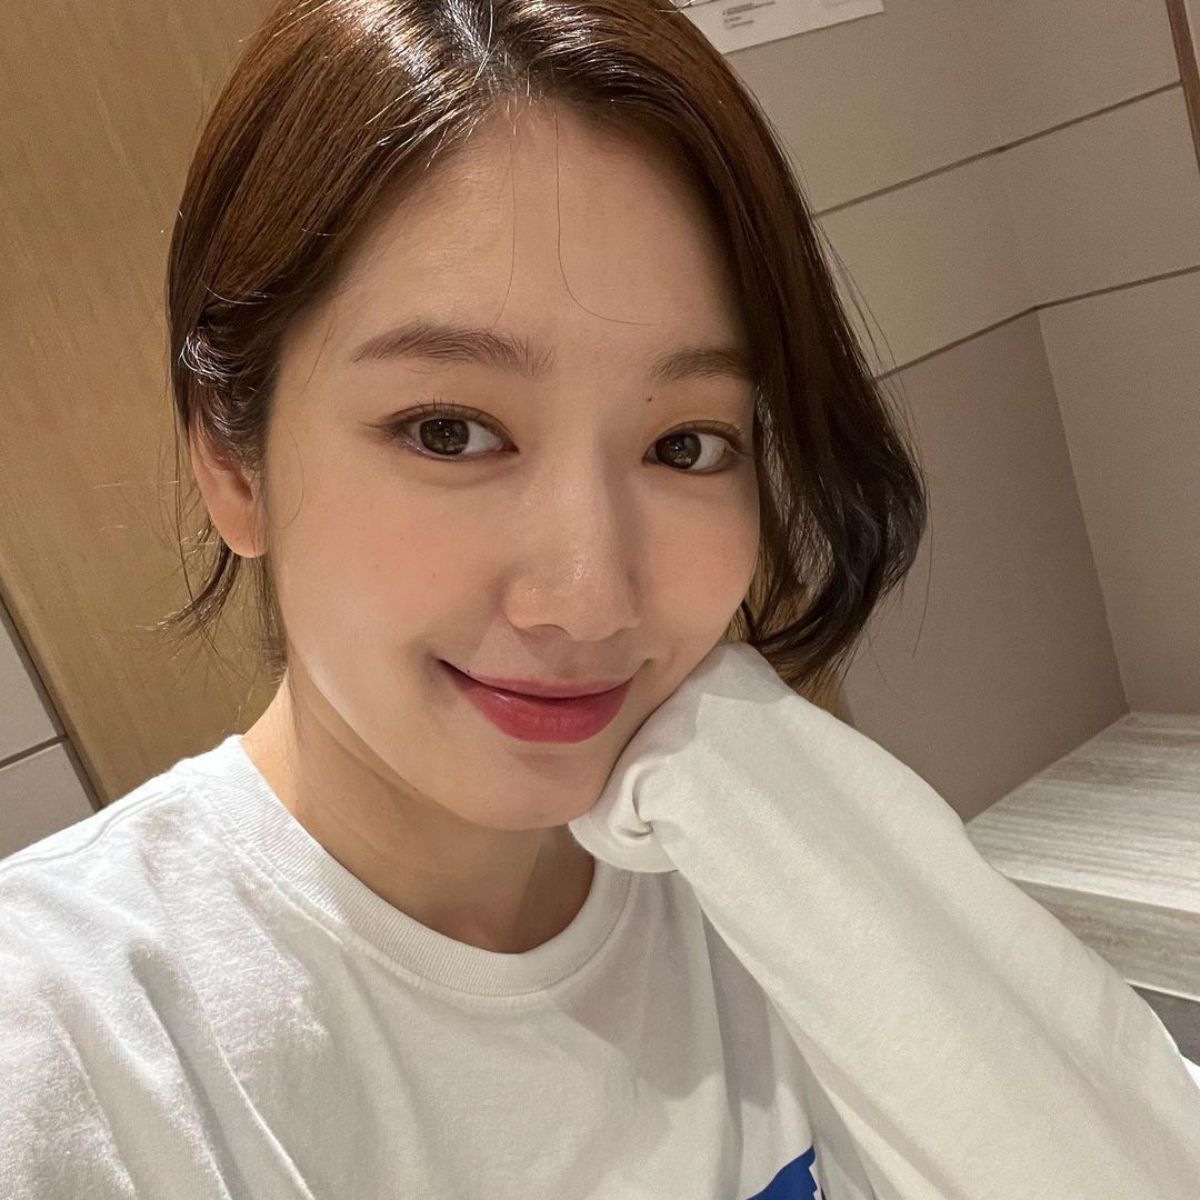 Park Shin Hye is GLOWING in first full face selfie after giving birth to her and Choi Tae Joon’s baby boy